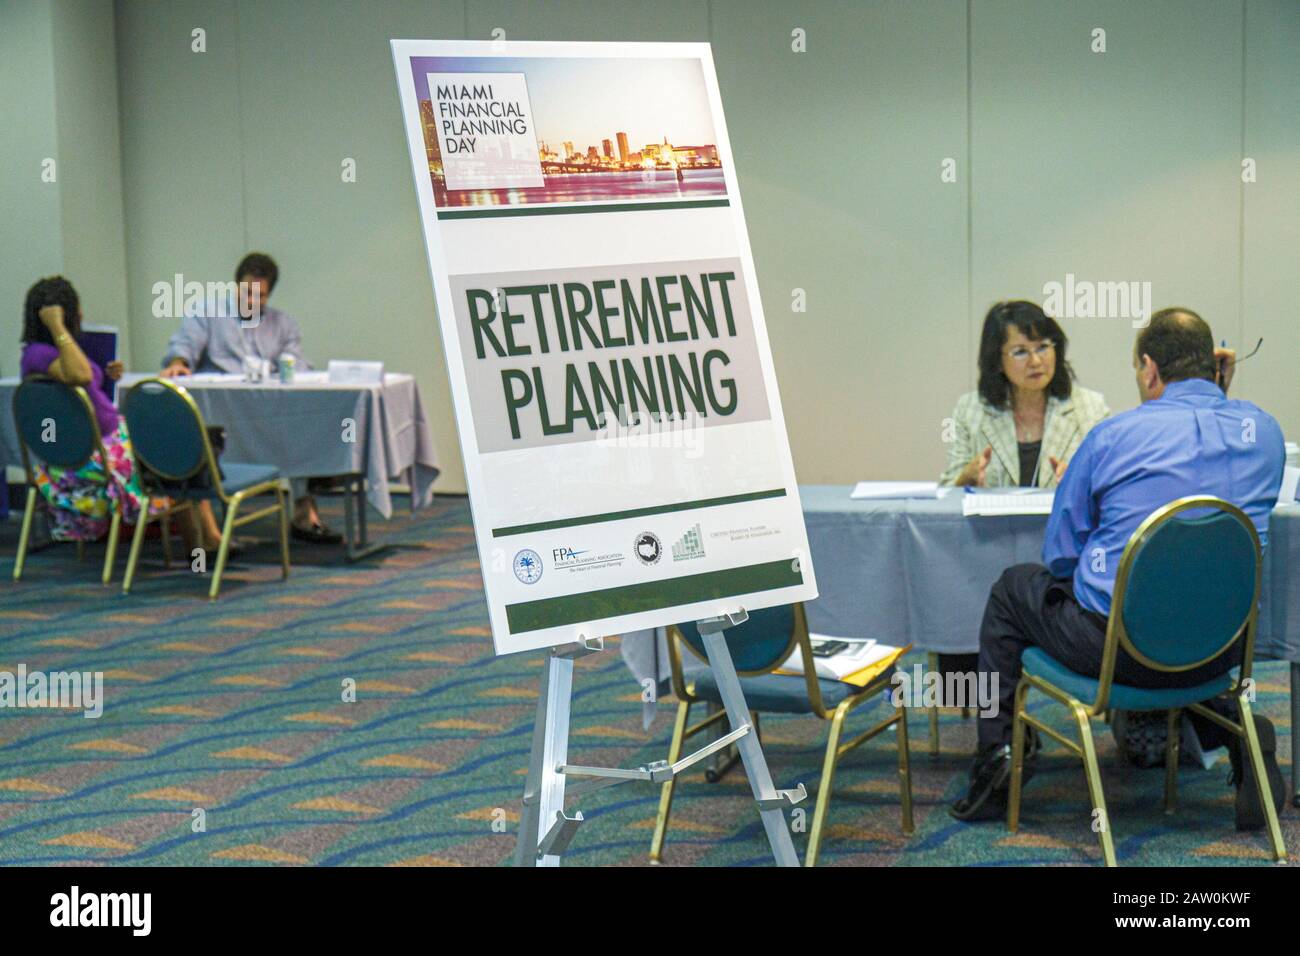 Miami Florida,James L. Knight Convention Center,Miami Financial Planning Day,free advice,guidanceal planners,sign,logo,retirement planning,Asian Asian Stock Photo